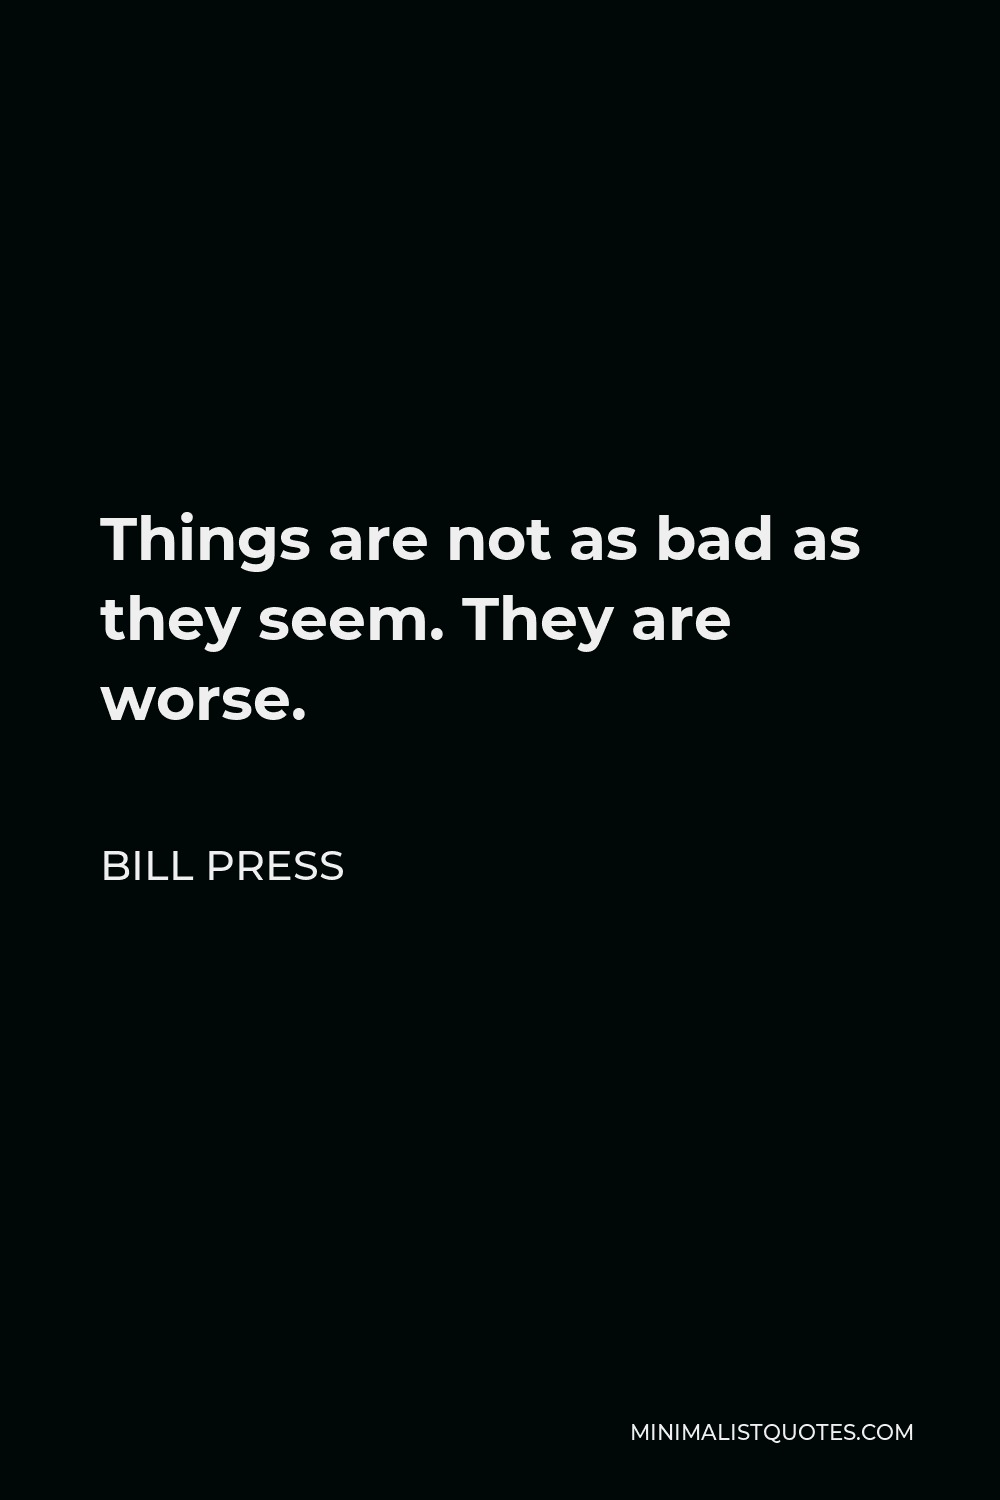 Bill Press Quote - Things are not as bad as they seem. They are worse.